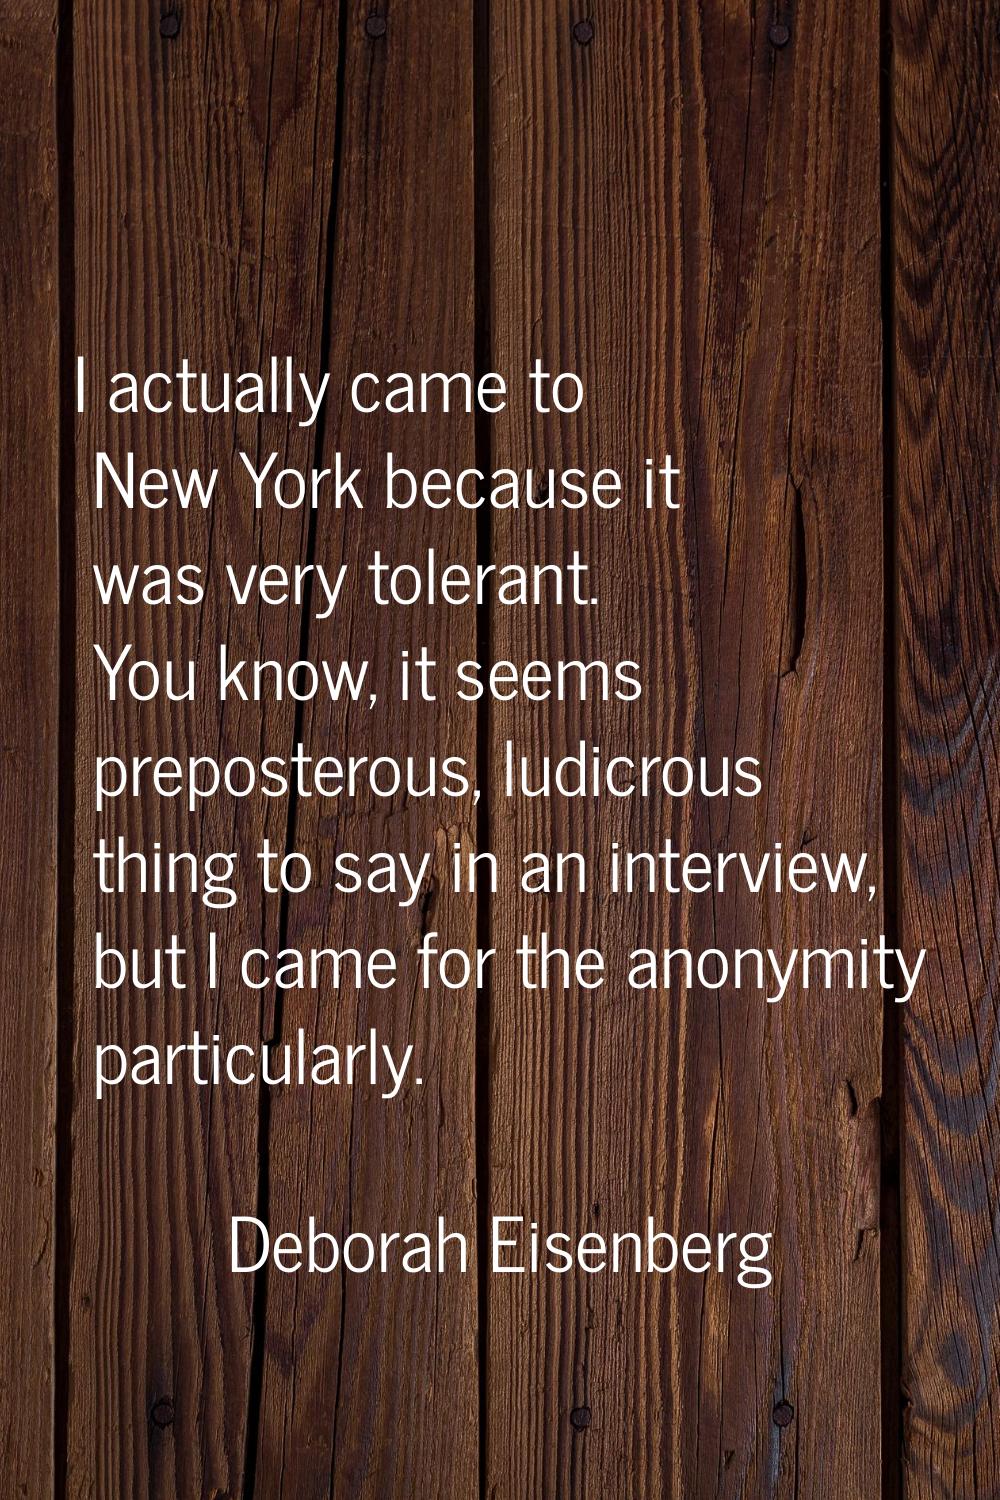 I actually came to New York because it was very tolerant. You know, it seems preposterous, ludicrou